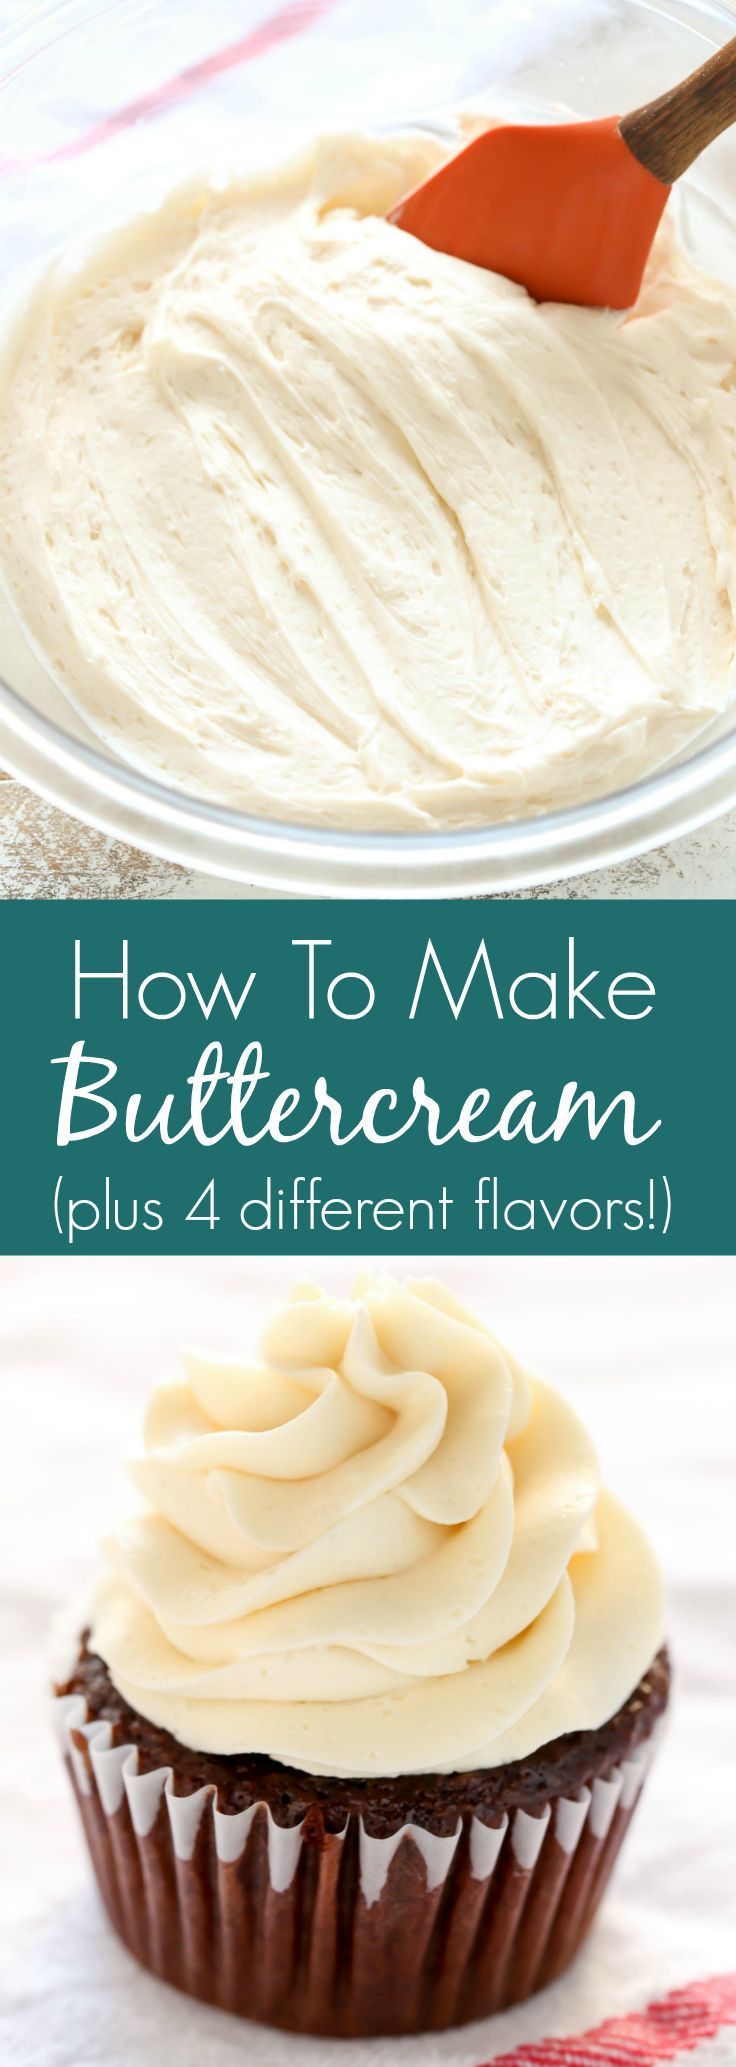 Learn how to make buttercream frosting with this easy tutorial. This is the BEST recipe for homemade buttercream, it pipes